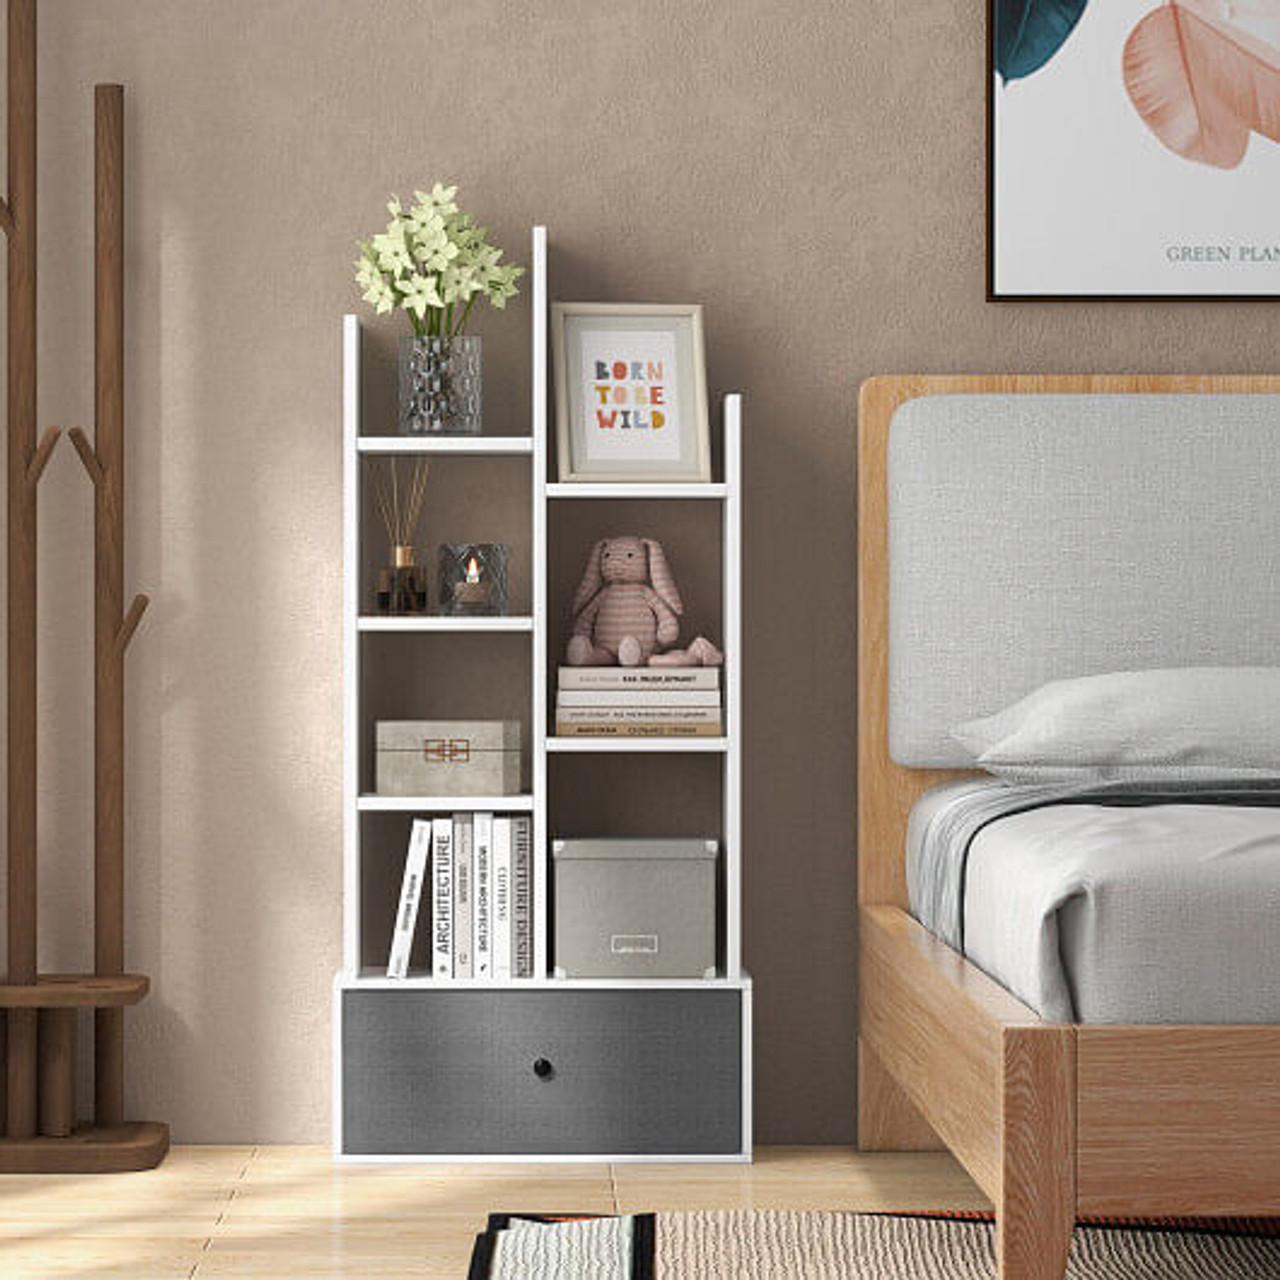 7-Tier Open-Back Bookshelf with Drawer-White